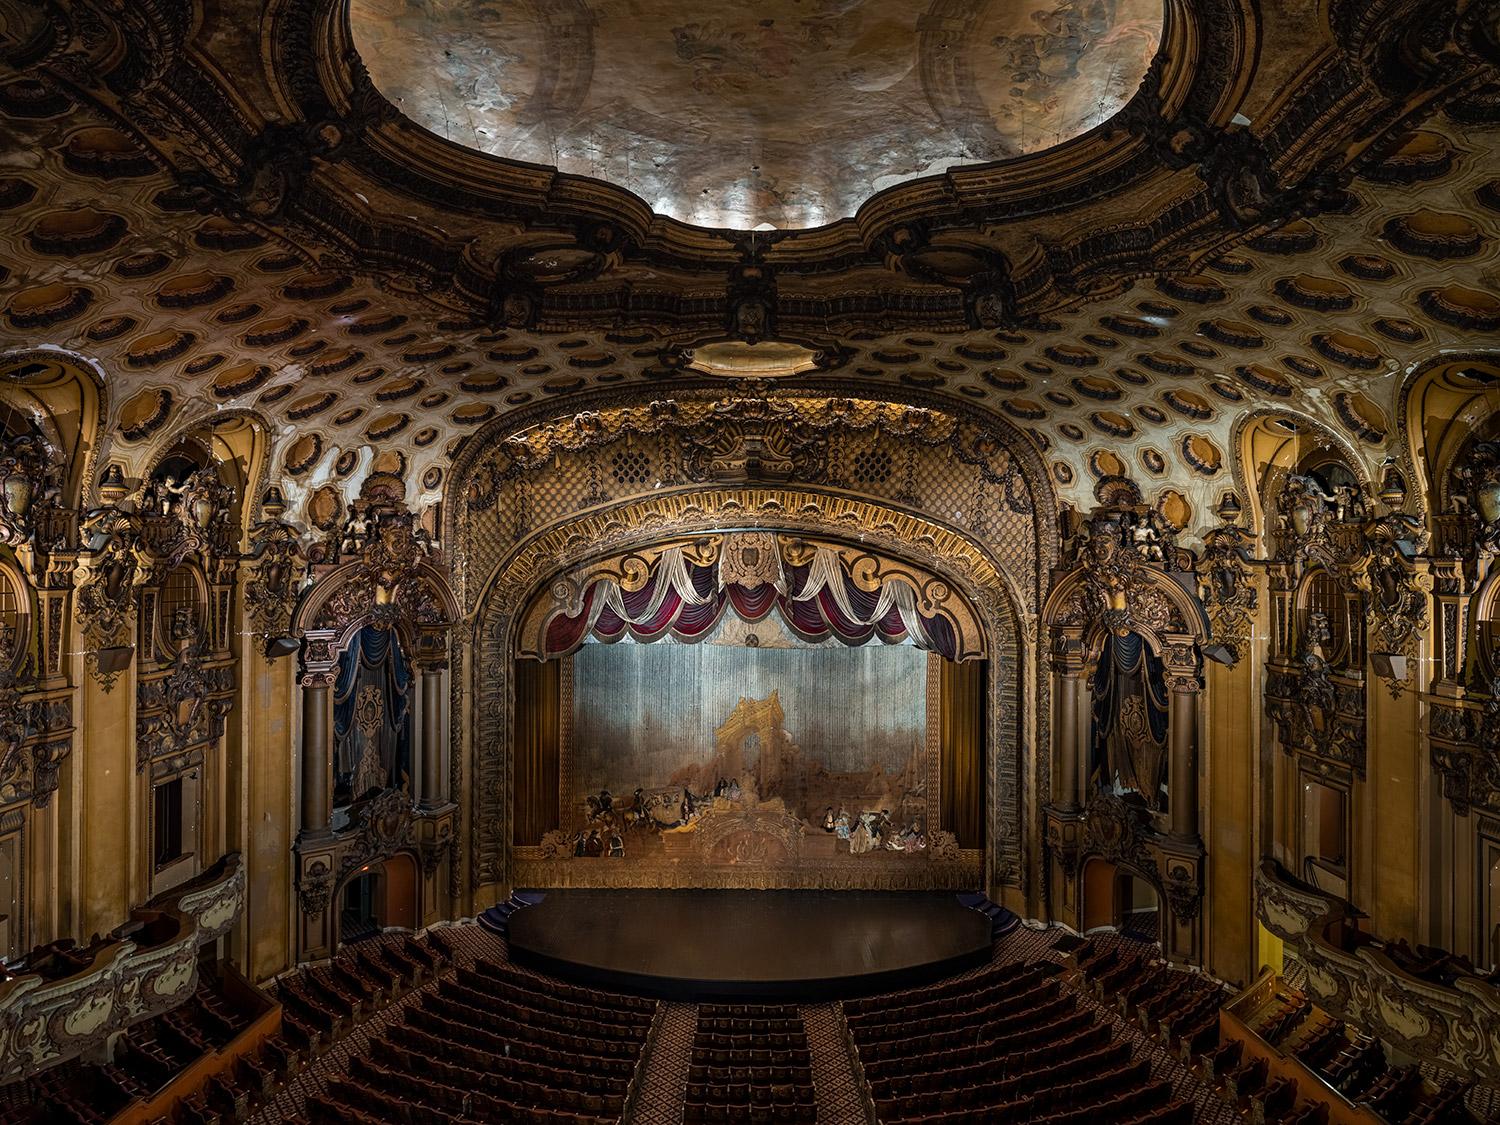 Christos J. Palios - Los Angeles Theatre, Photography 2022, Printed After